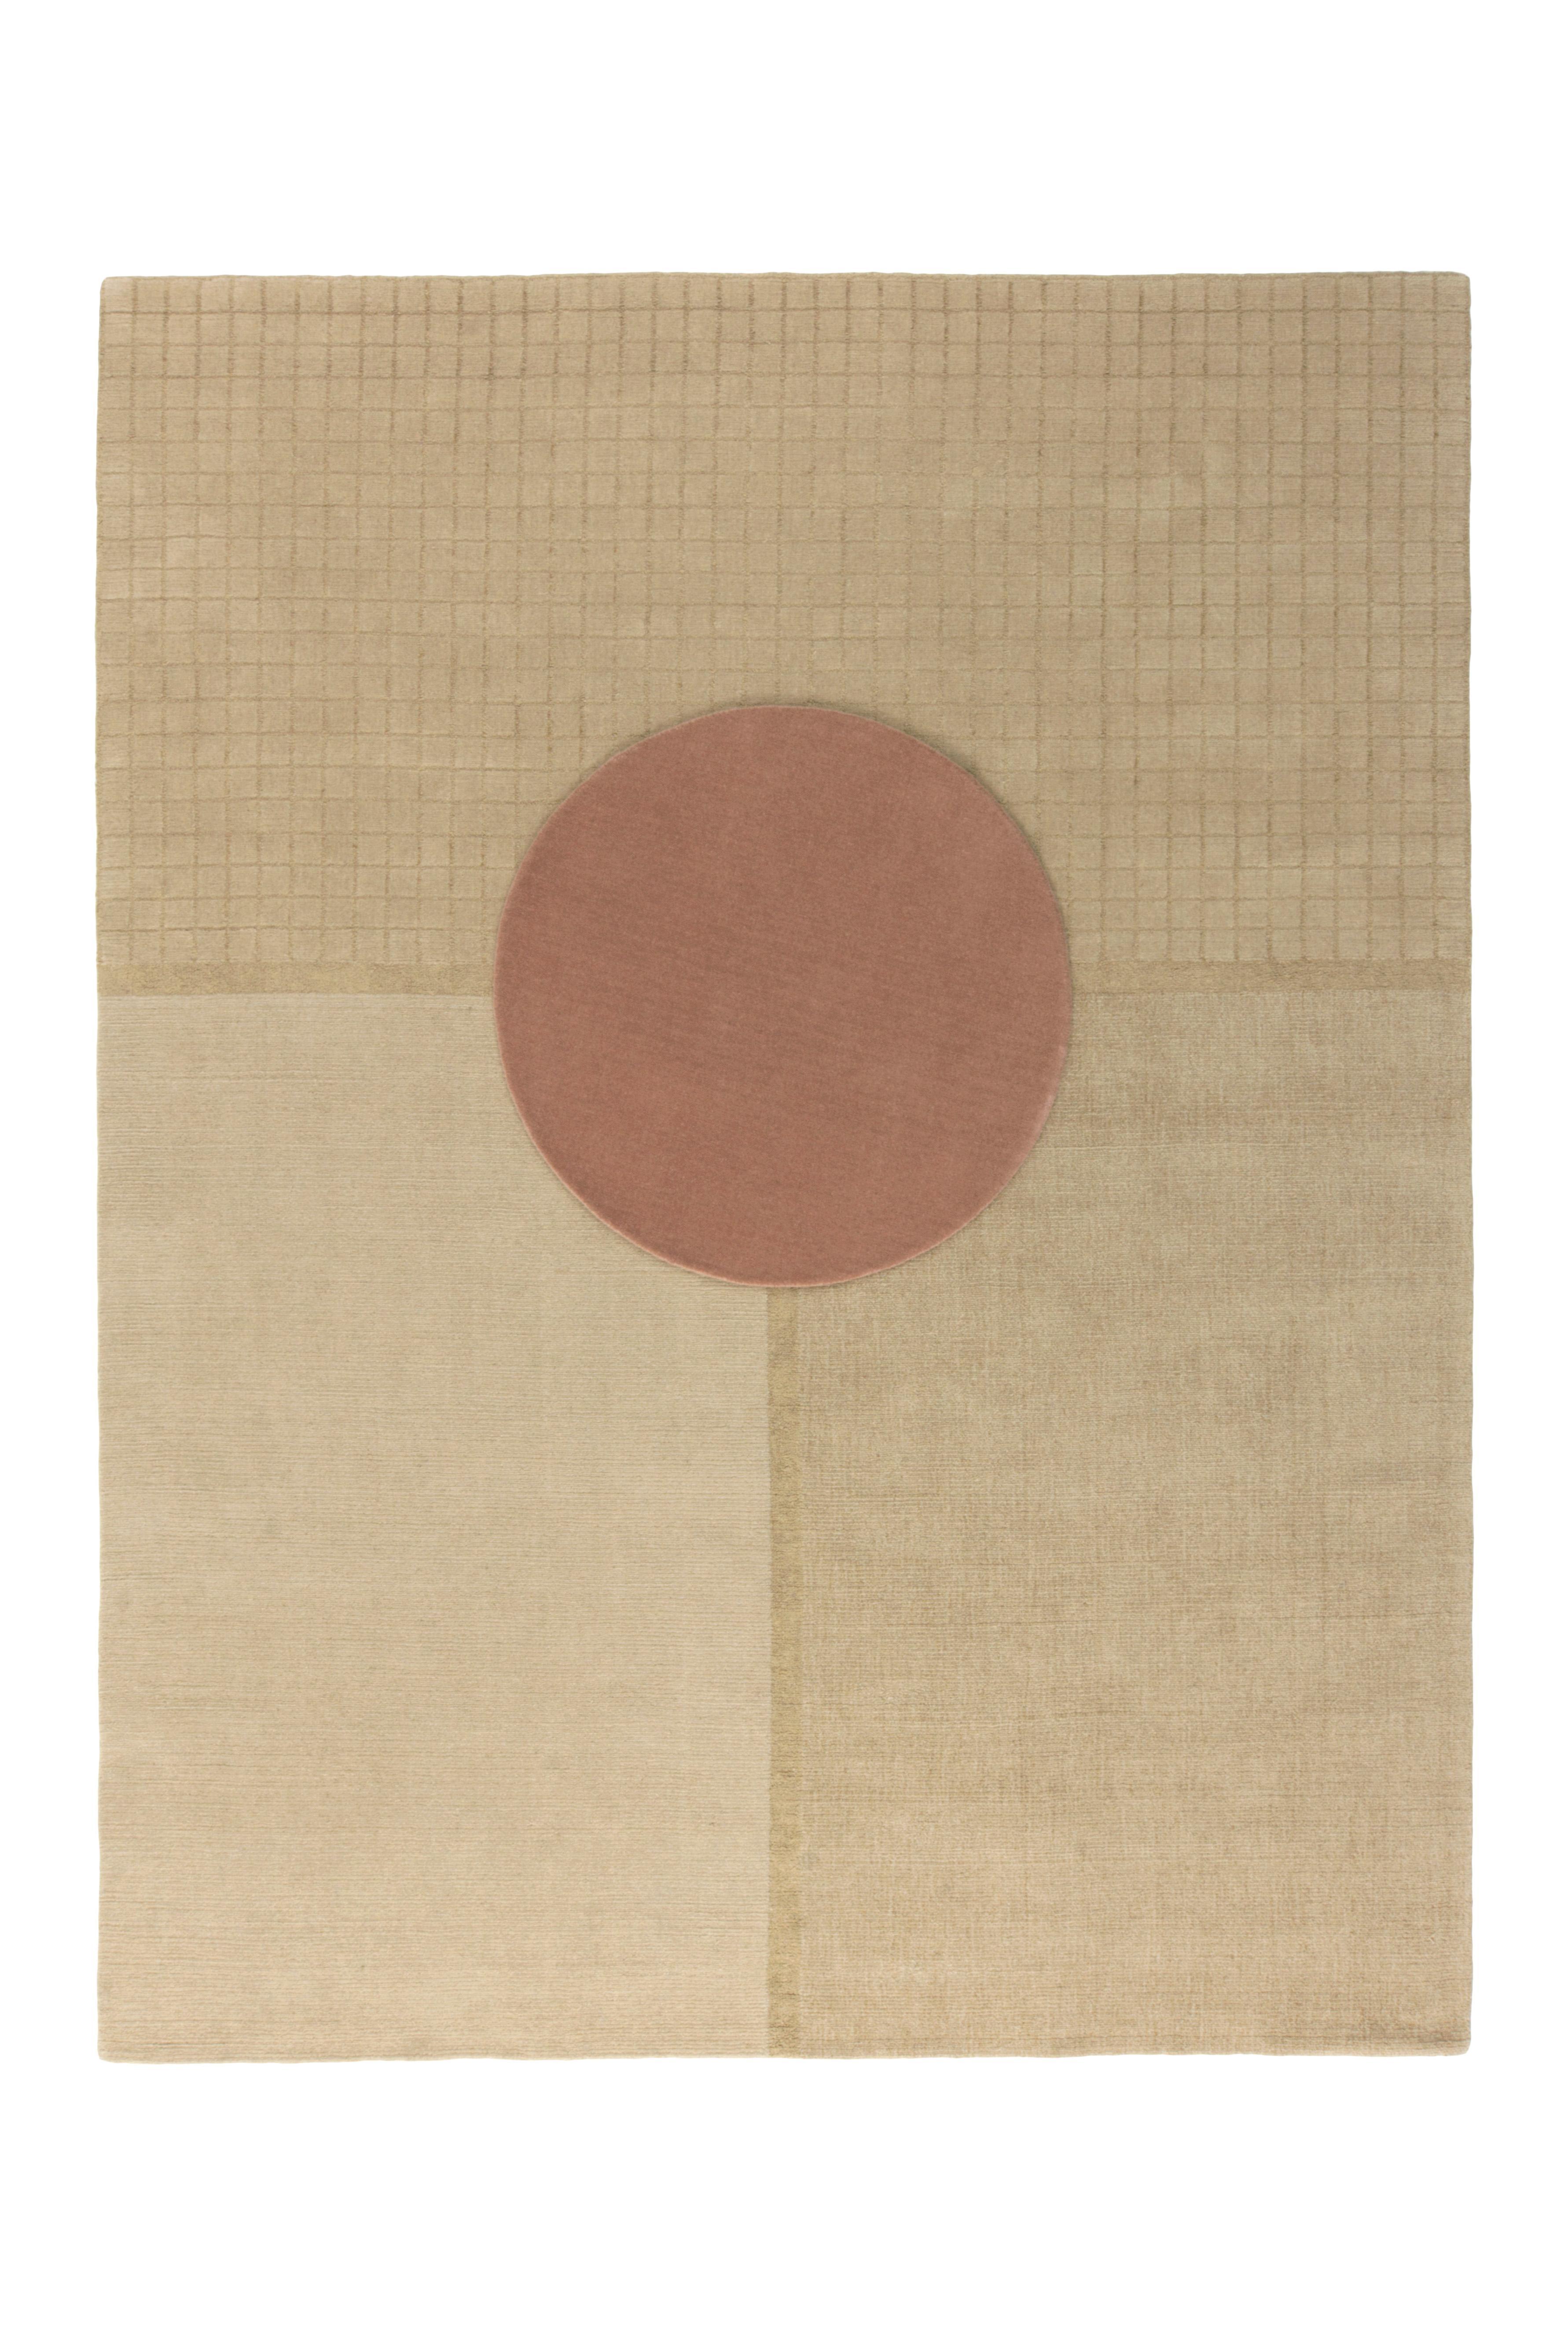 Designed by textile designer Mae Engelgeer and inspired by the feeling, aesthetics and graphic alignment of the traditional Japanese Tatami flooring, Ceremony is a group of three rugs, Daytime, Evening Glow and Moonlight, and a circular one, Focus,